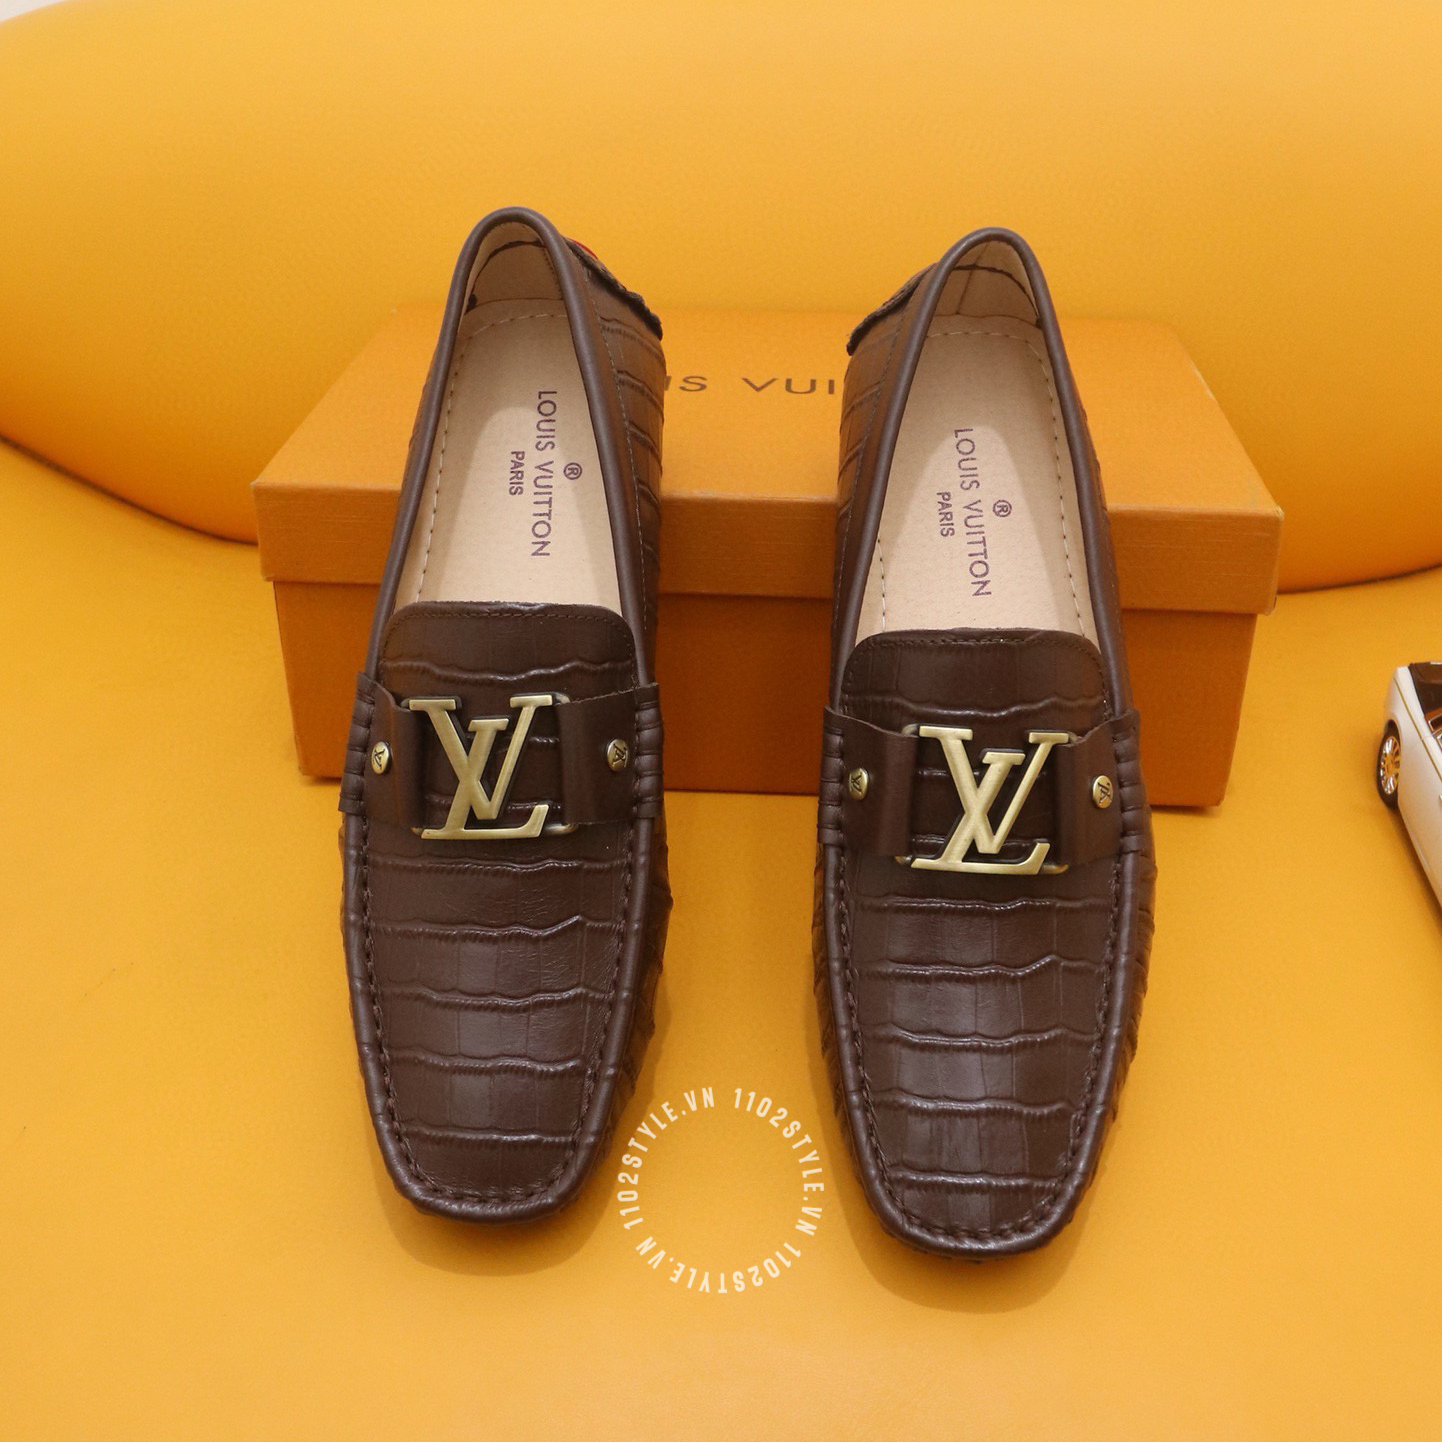 Giày nam Major Loafer Louis Vuitton Like auth 1:1 - LOUIS KIMMI STORE